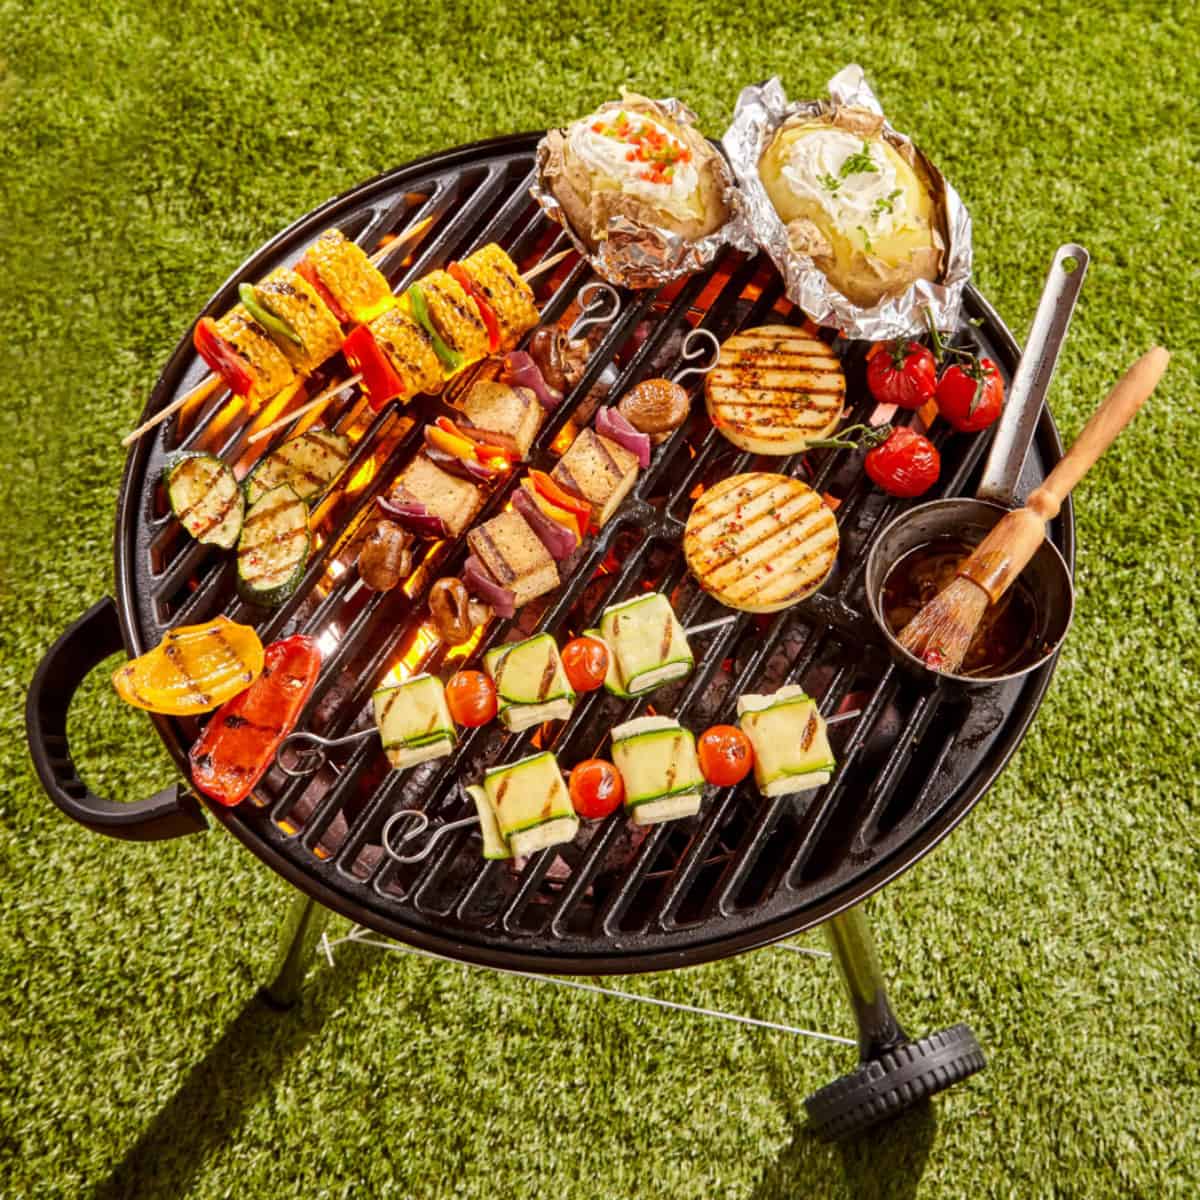 Veggie kabobs on a charcoal grill with sauce and basting brush.